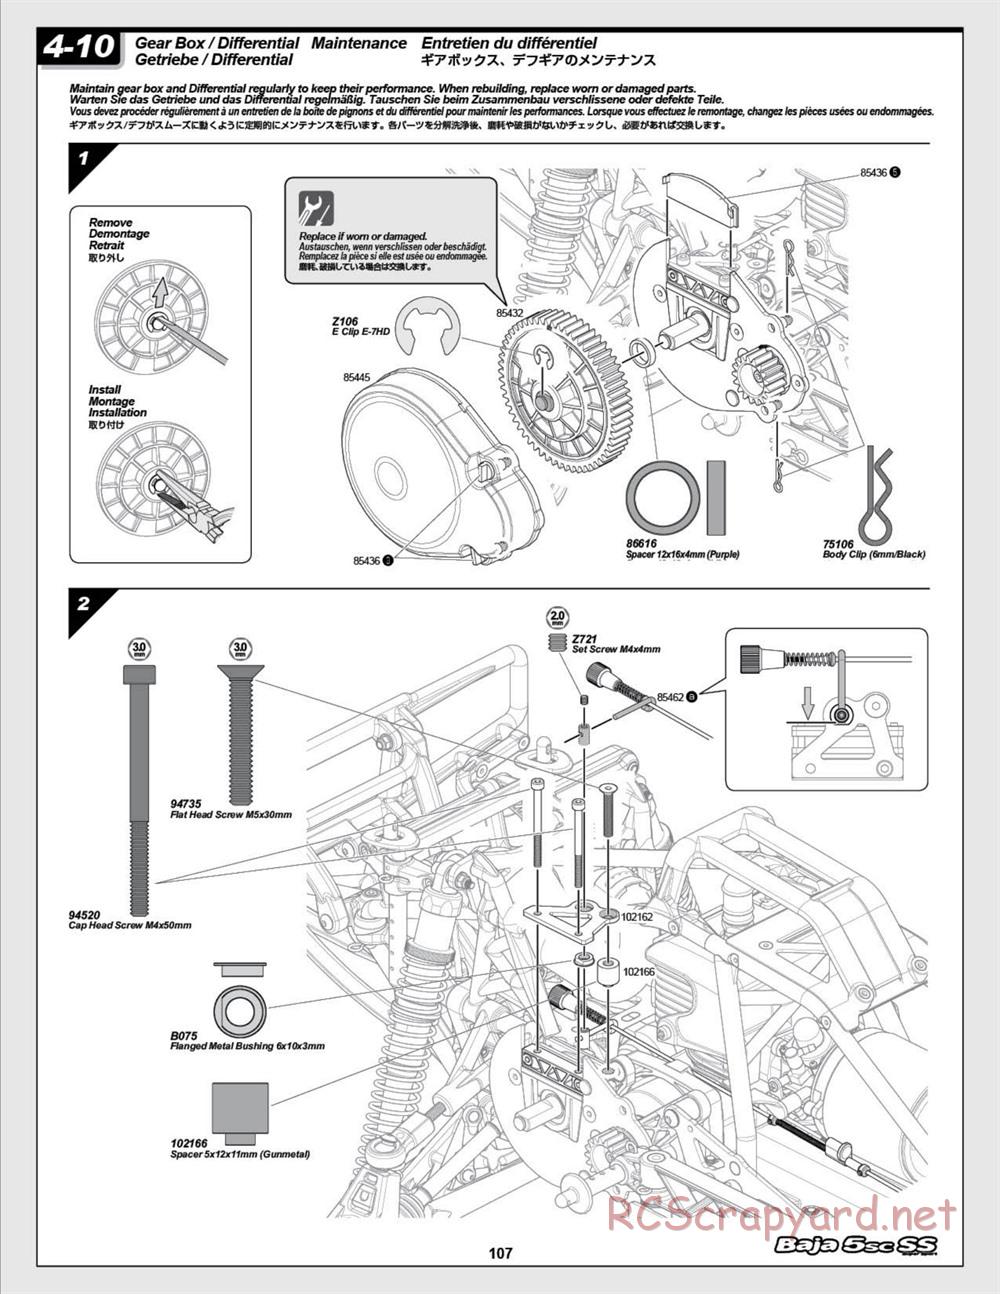 HPI - Baja 5SC SS - Exploded View - Page 107